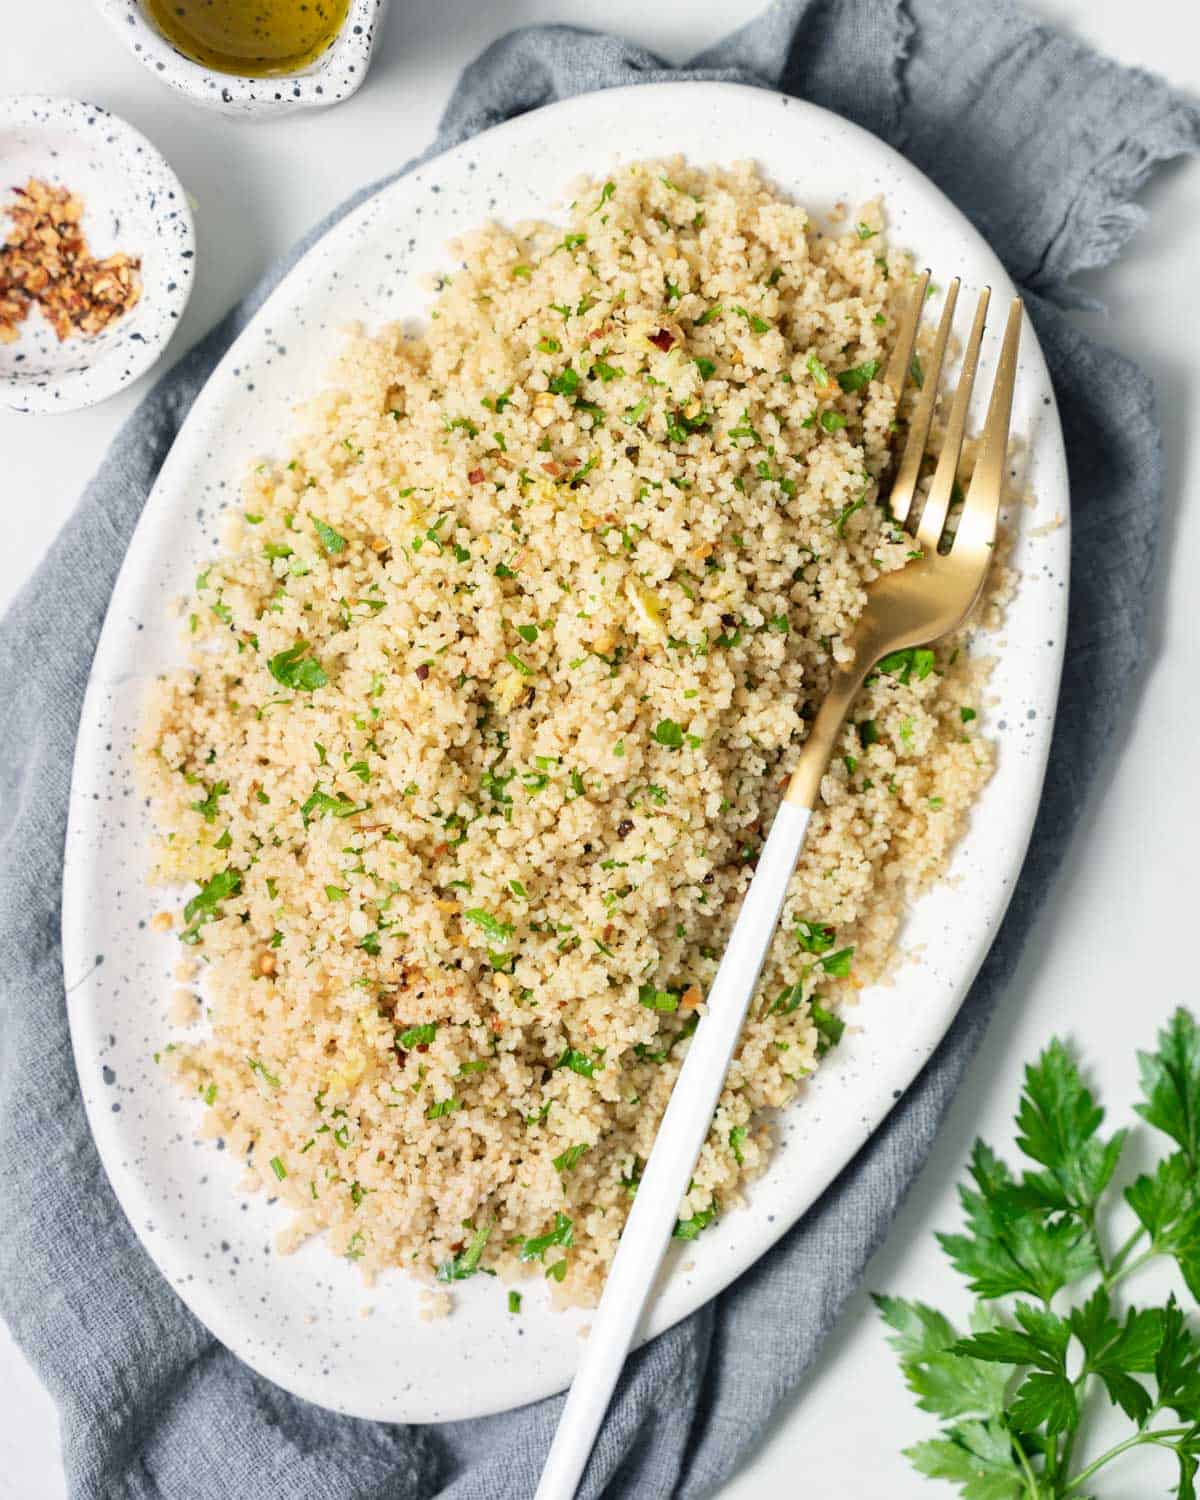 Couscous with fresh parsley on a white serving platter with a fork.